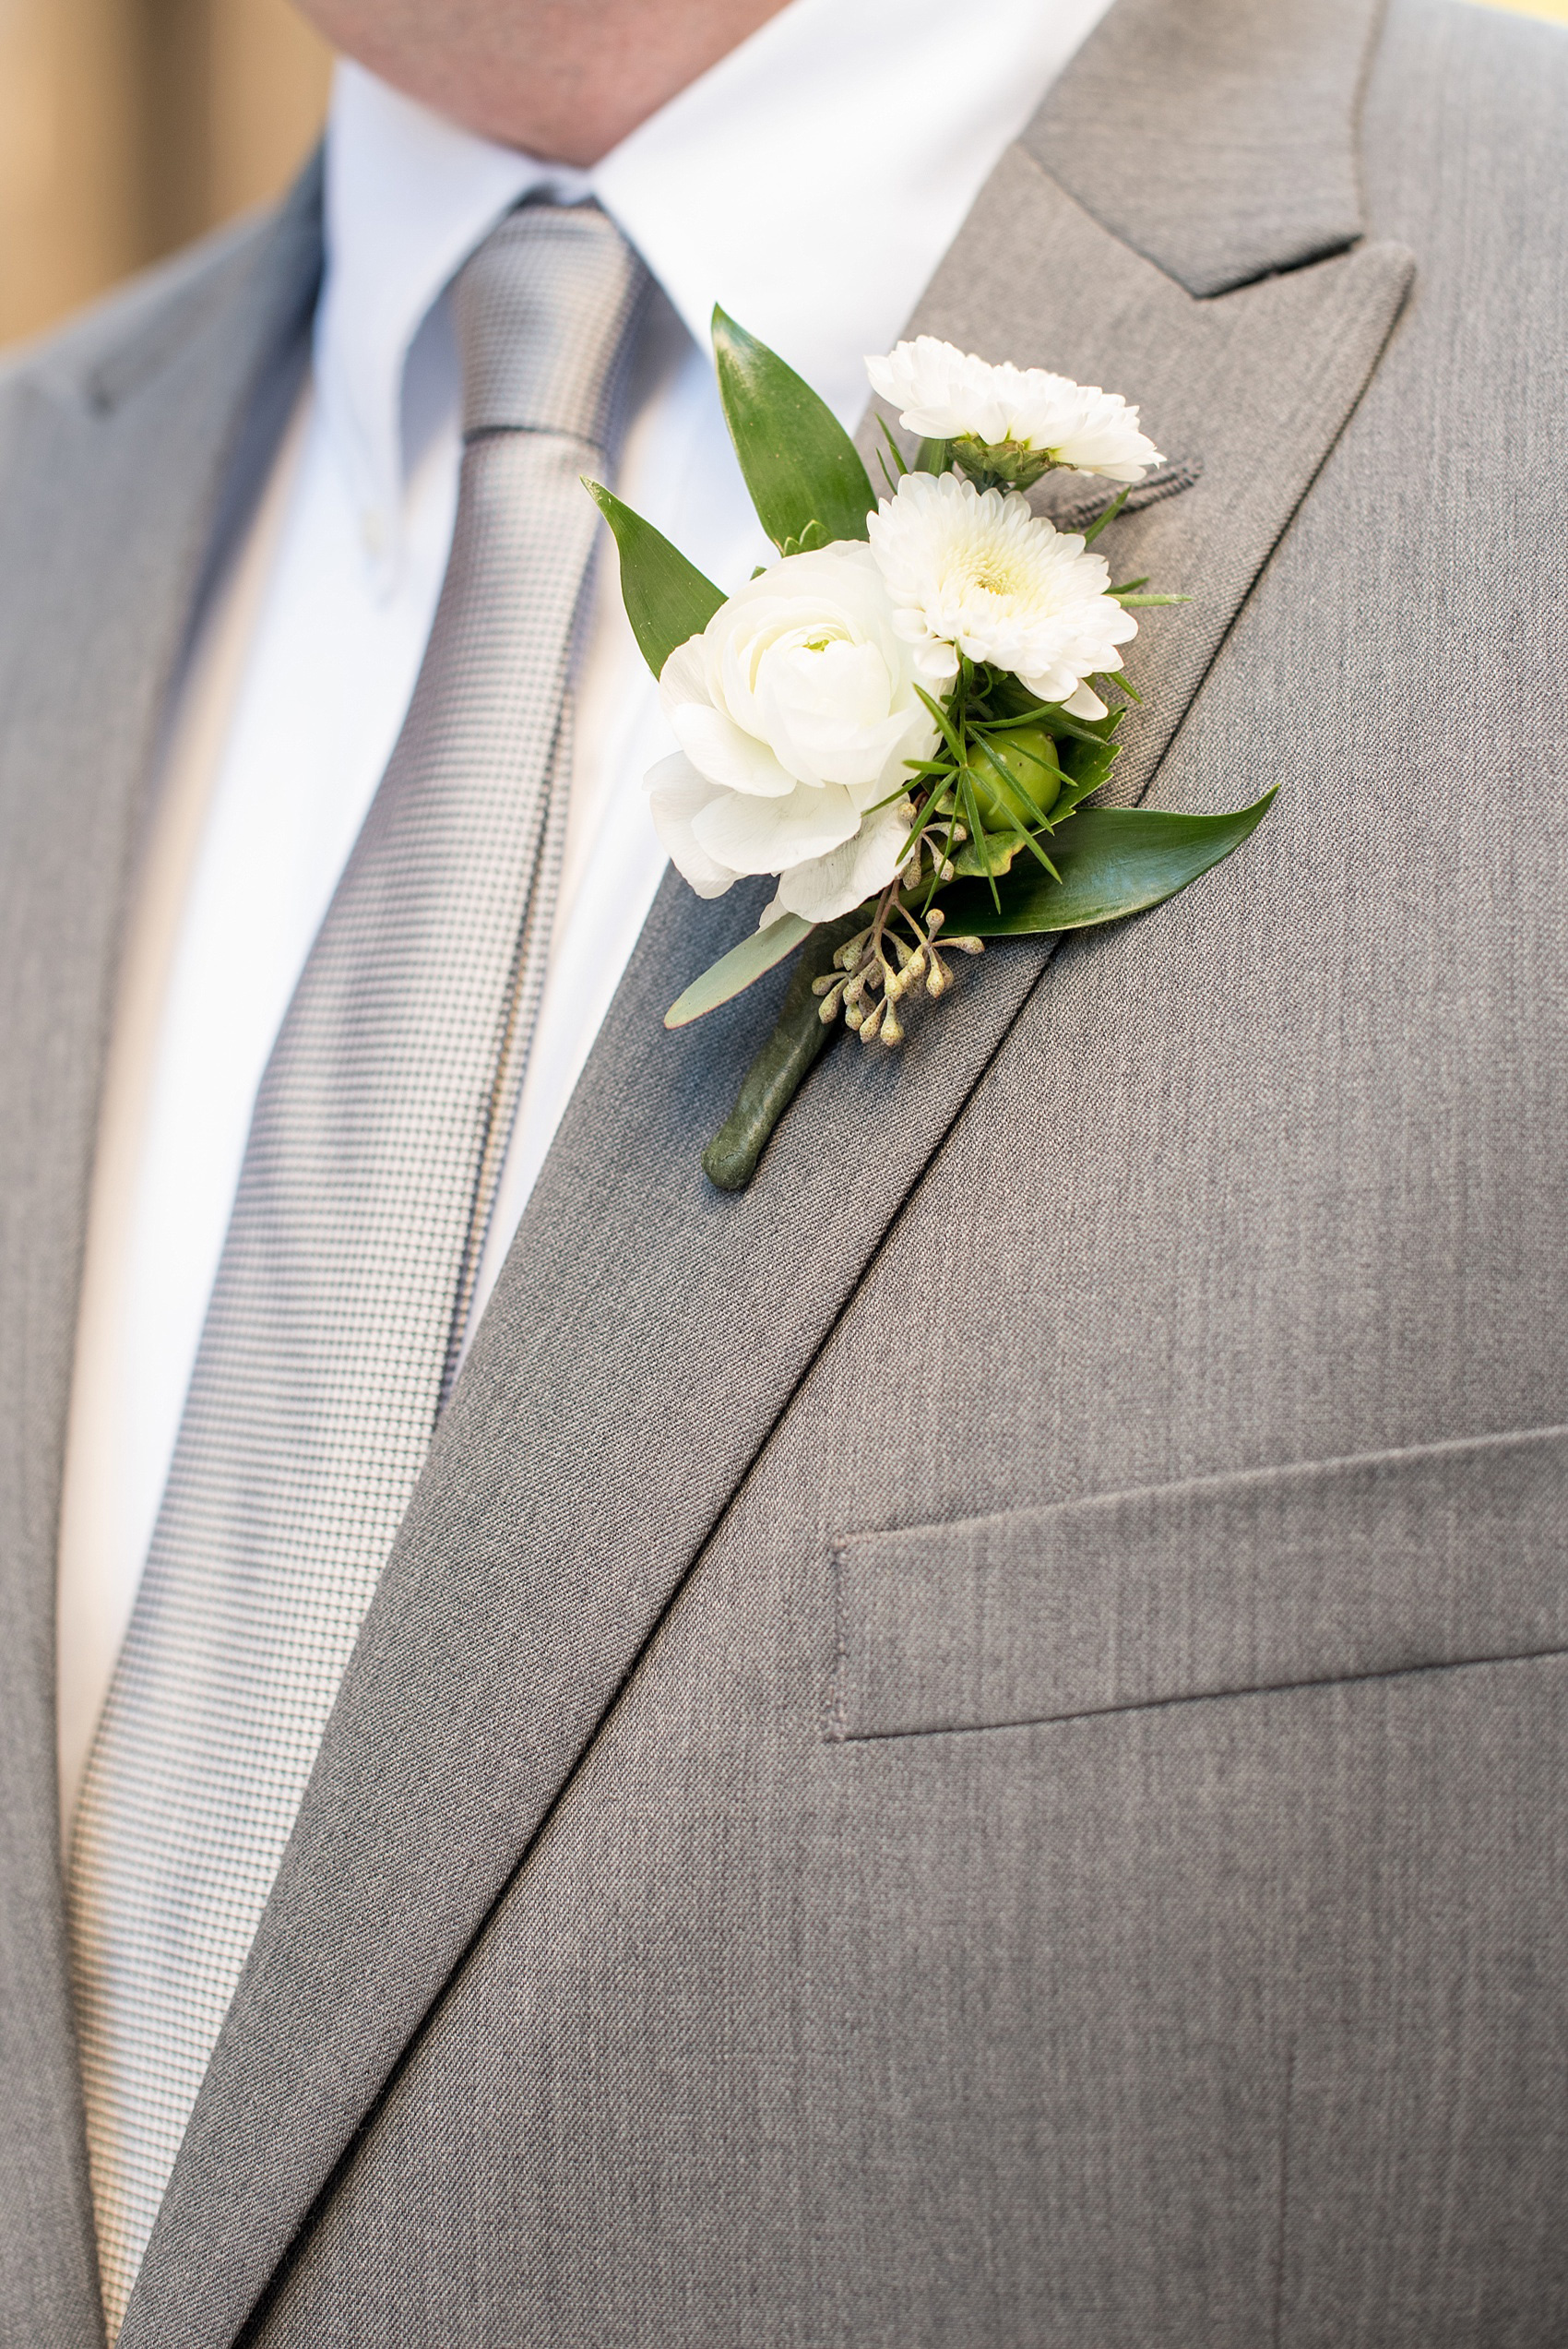 Mikkel Paige Photography photos from a wedding at The Glass Box and Stockroom at 230 in Raleigh. A picture of the groom's grey suit and tie with white boutonniere.